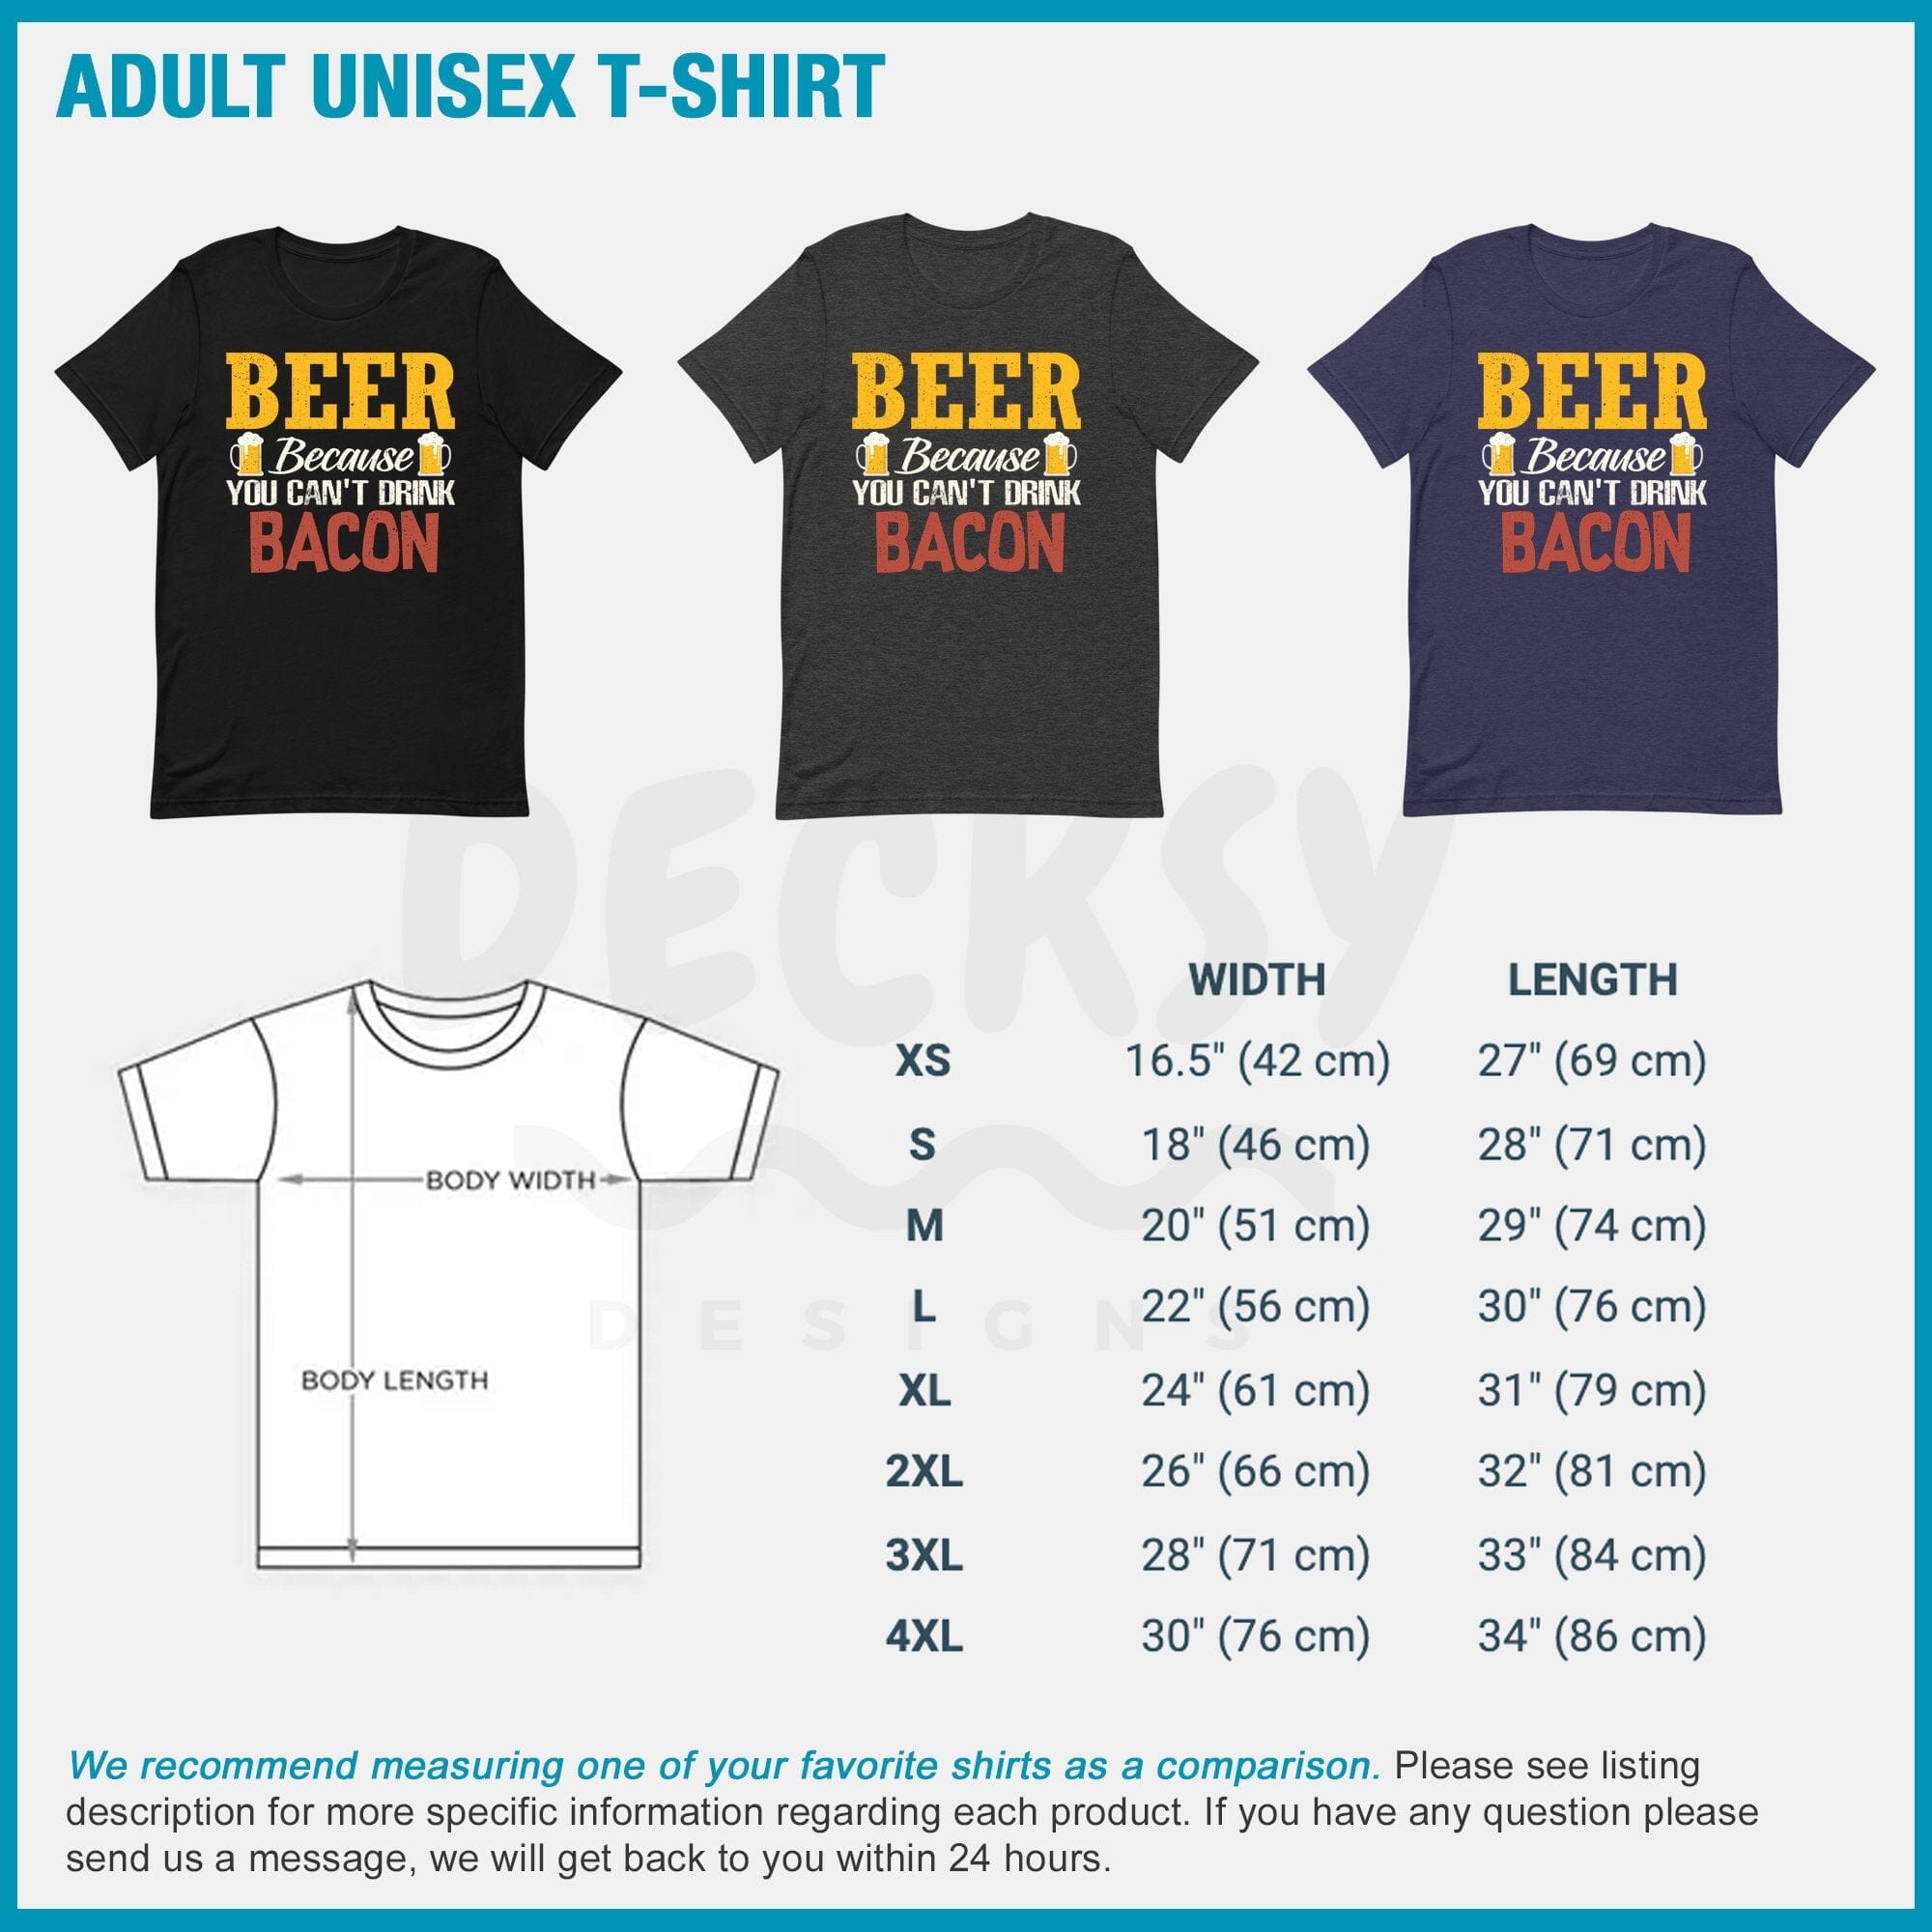 Beer Shirt, Bacon Lover Gift-Clothing:Gender-Neutral Adult Clothing:Tops & Tees:T-shirts:Graphic Tees-DecksyDesigns